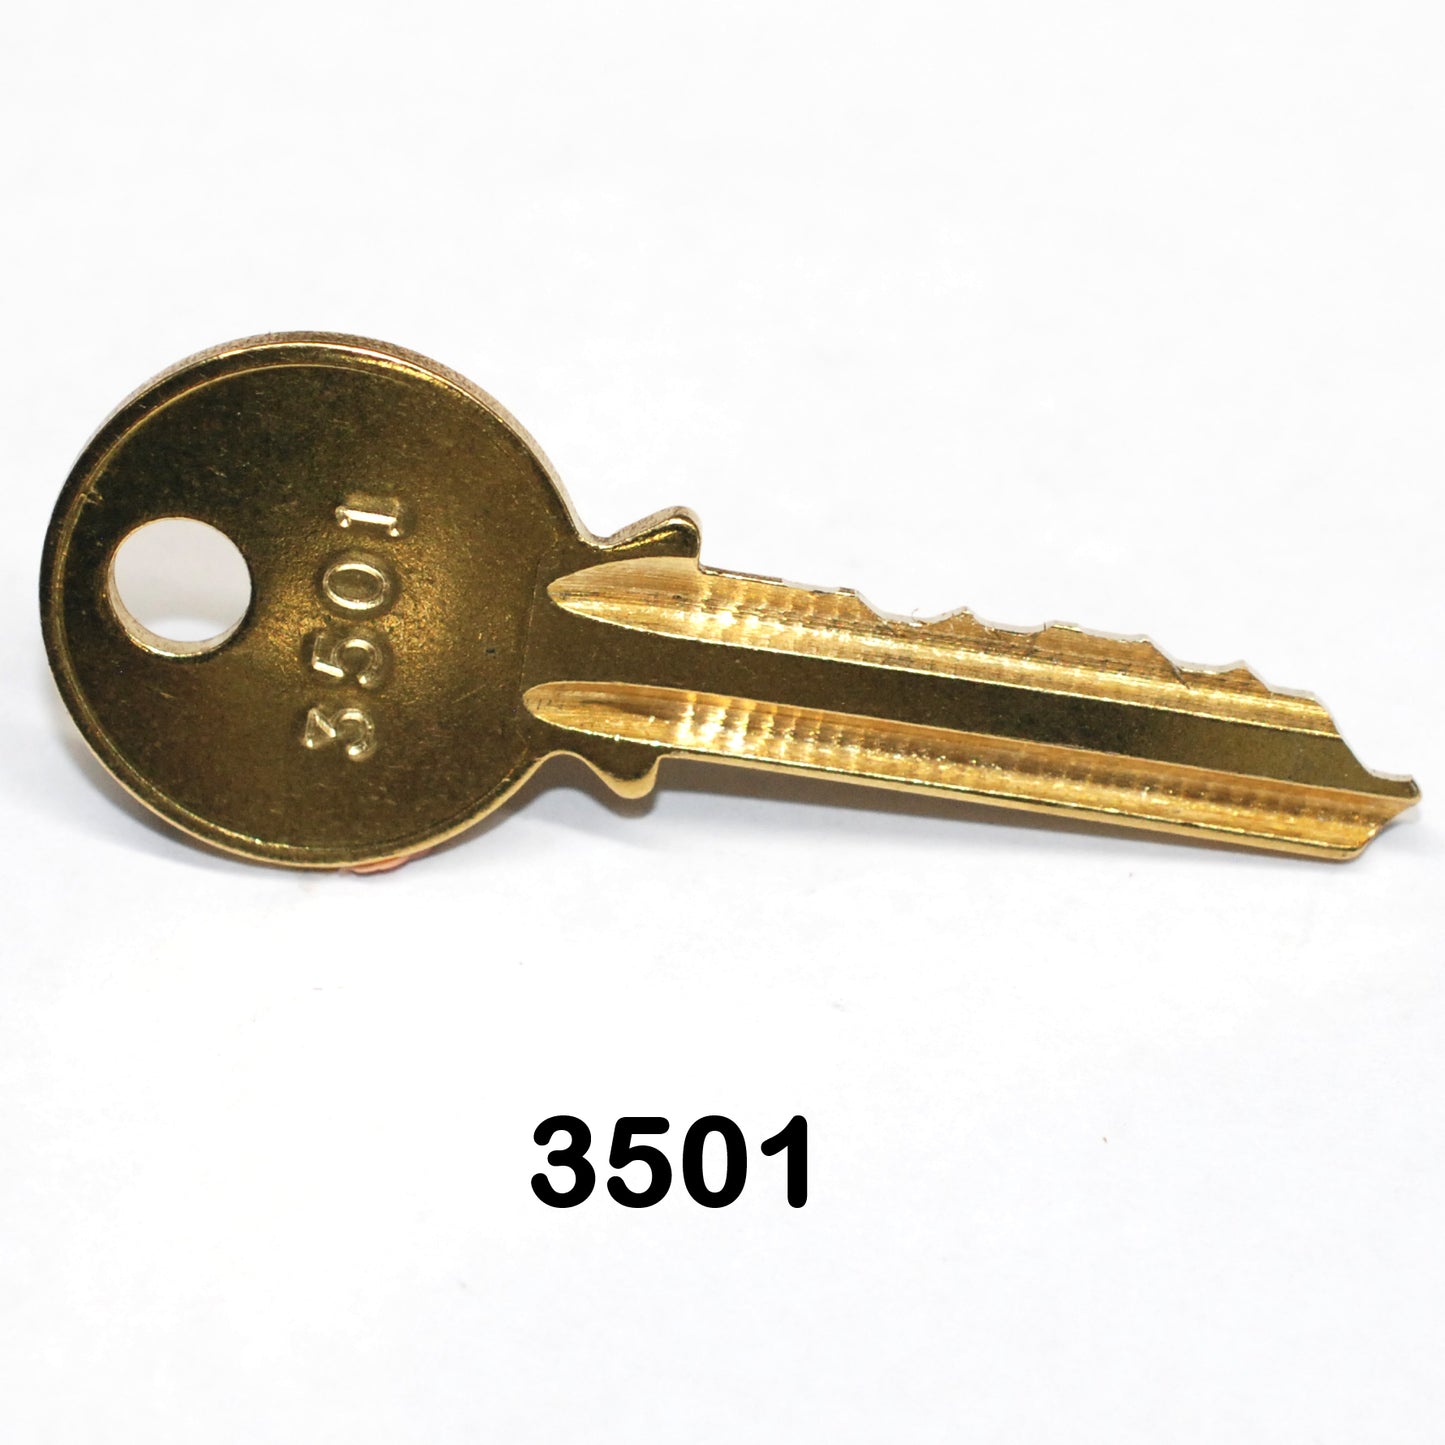 3501 Yale Key for Armor Elevator Fixtures